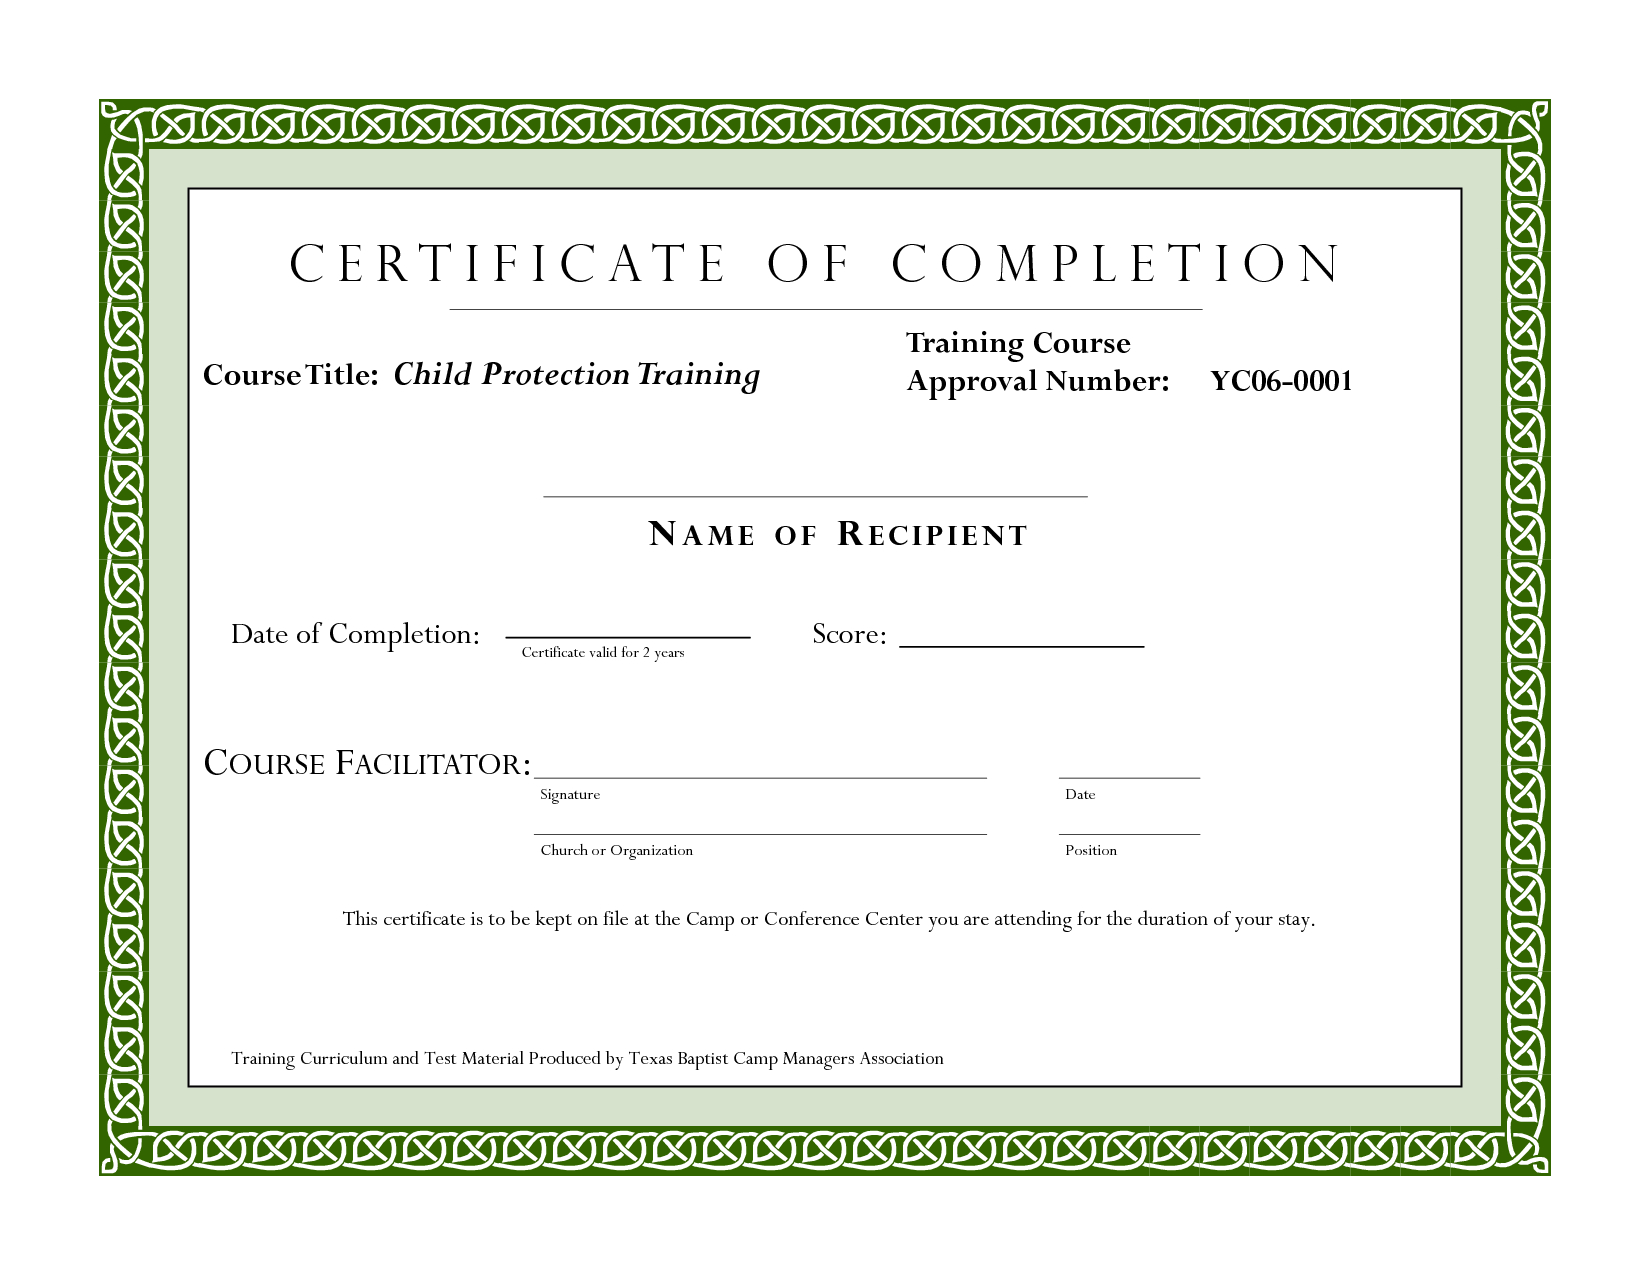 Course Completion Certificate Template | Certificate Of Intended For Certification Of Completion Template